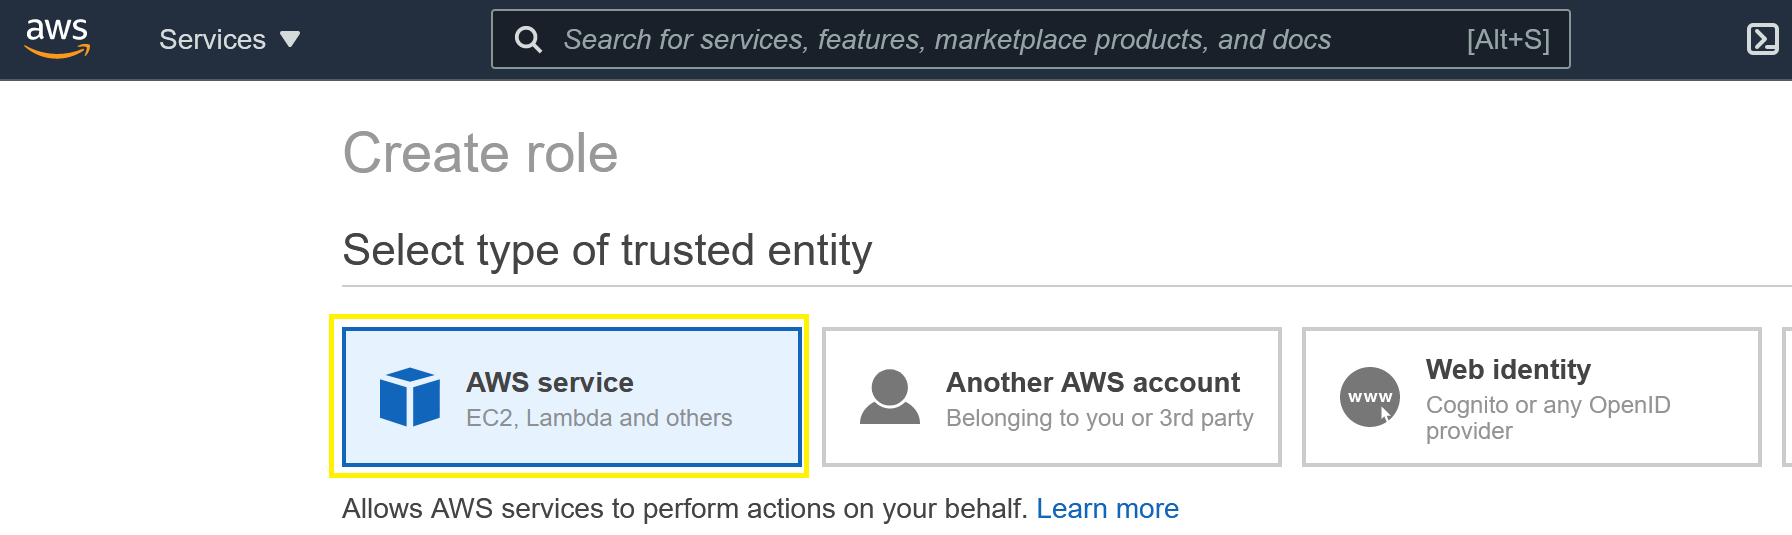 Create Role menu showing AWS Service selection.